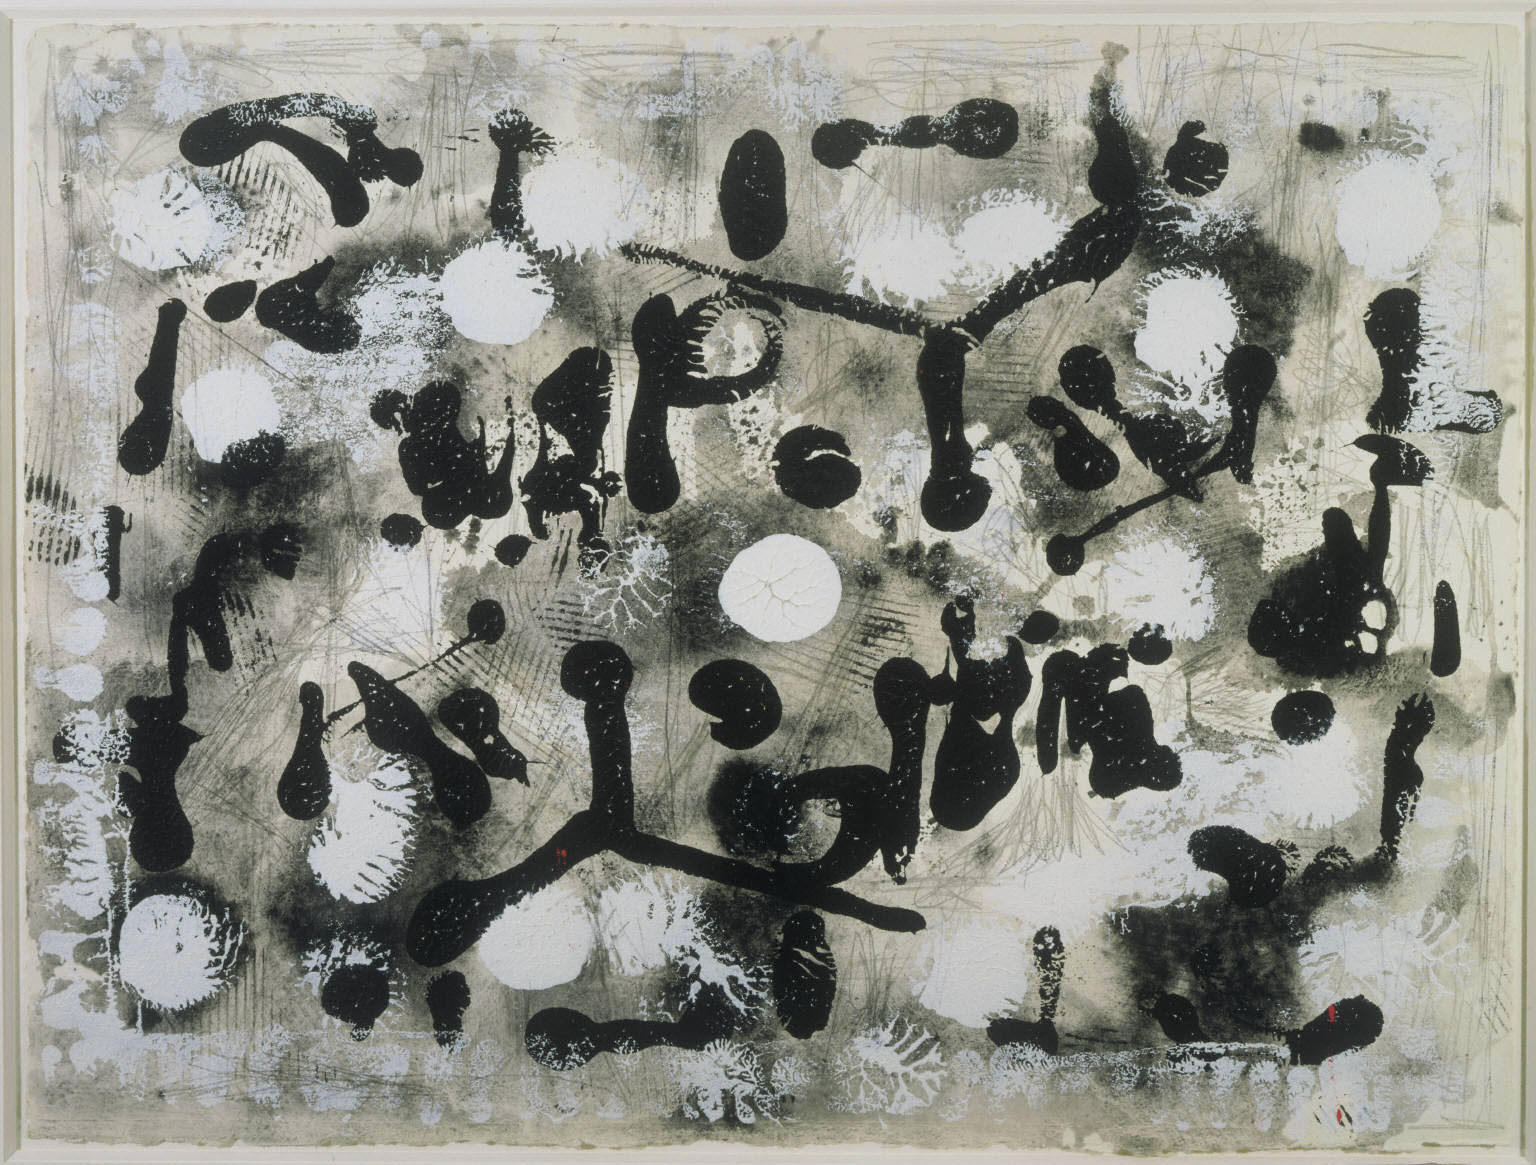 An abstract work on paper of black and white shapes and splatters